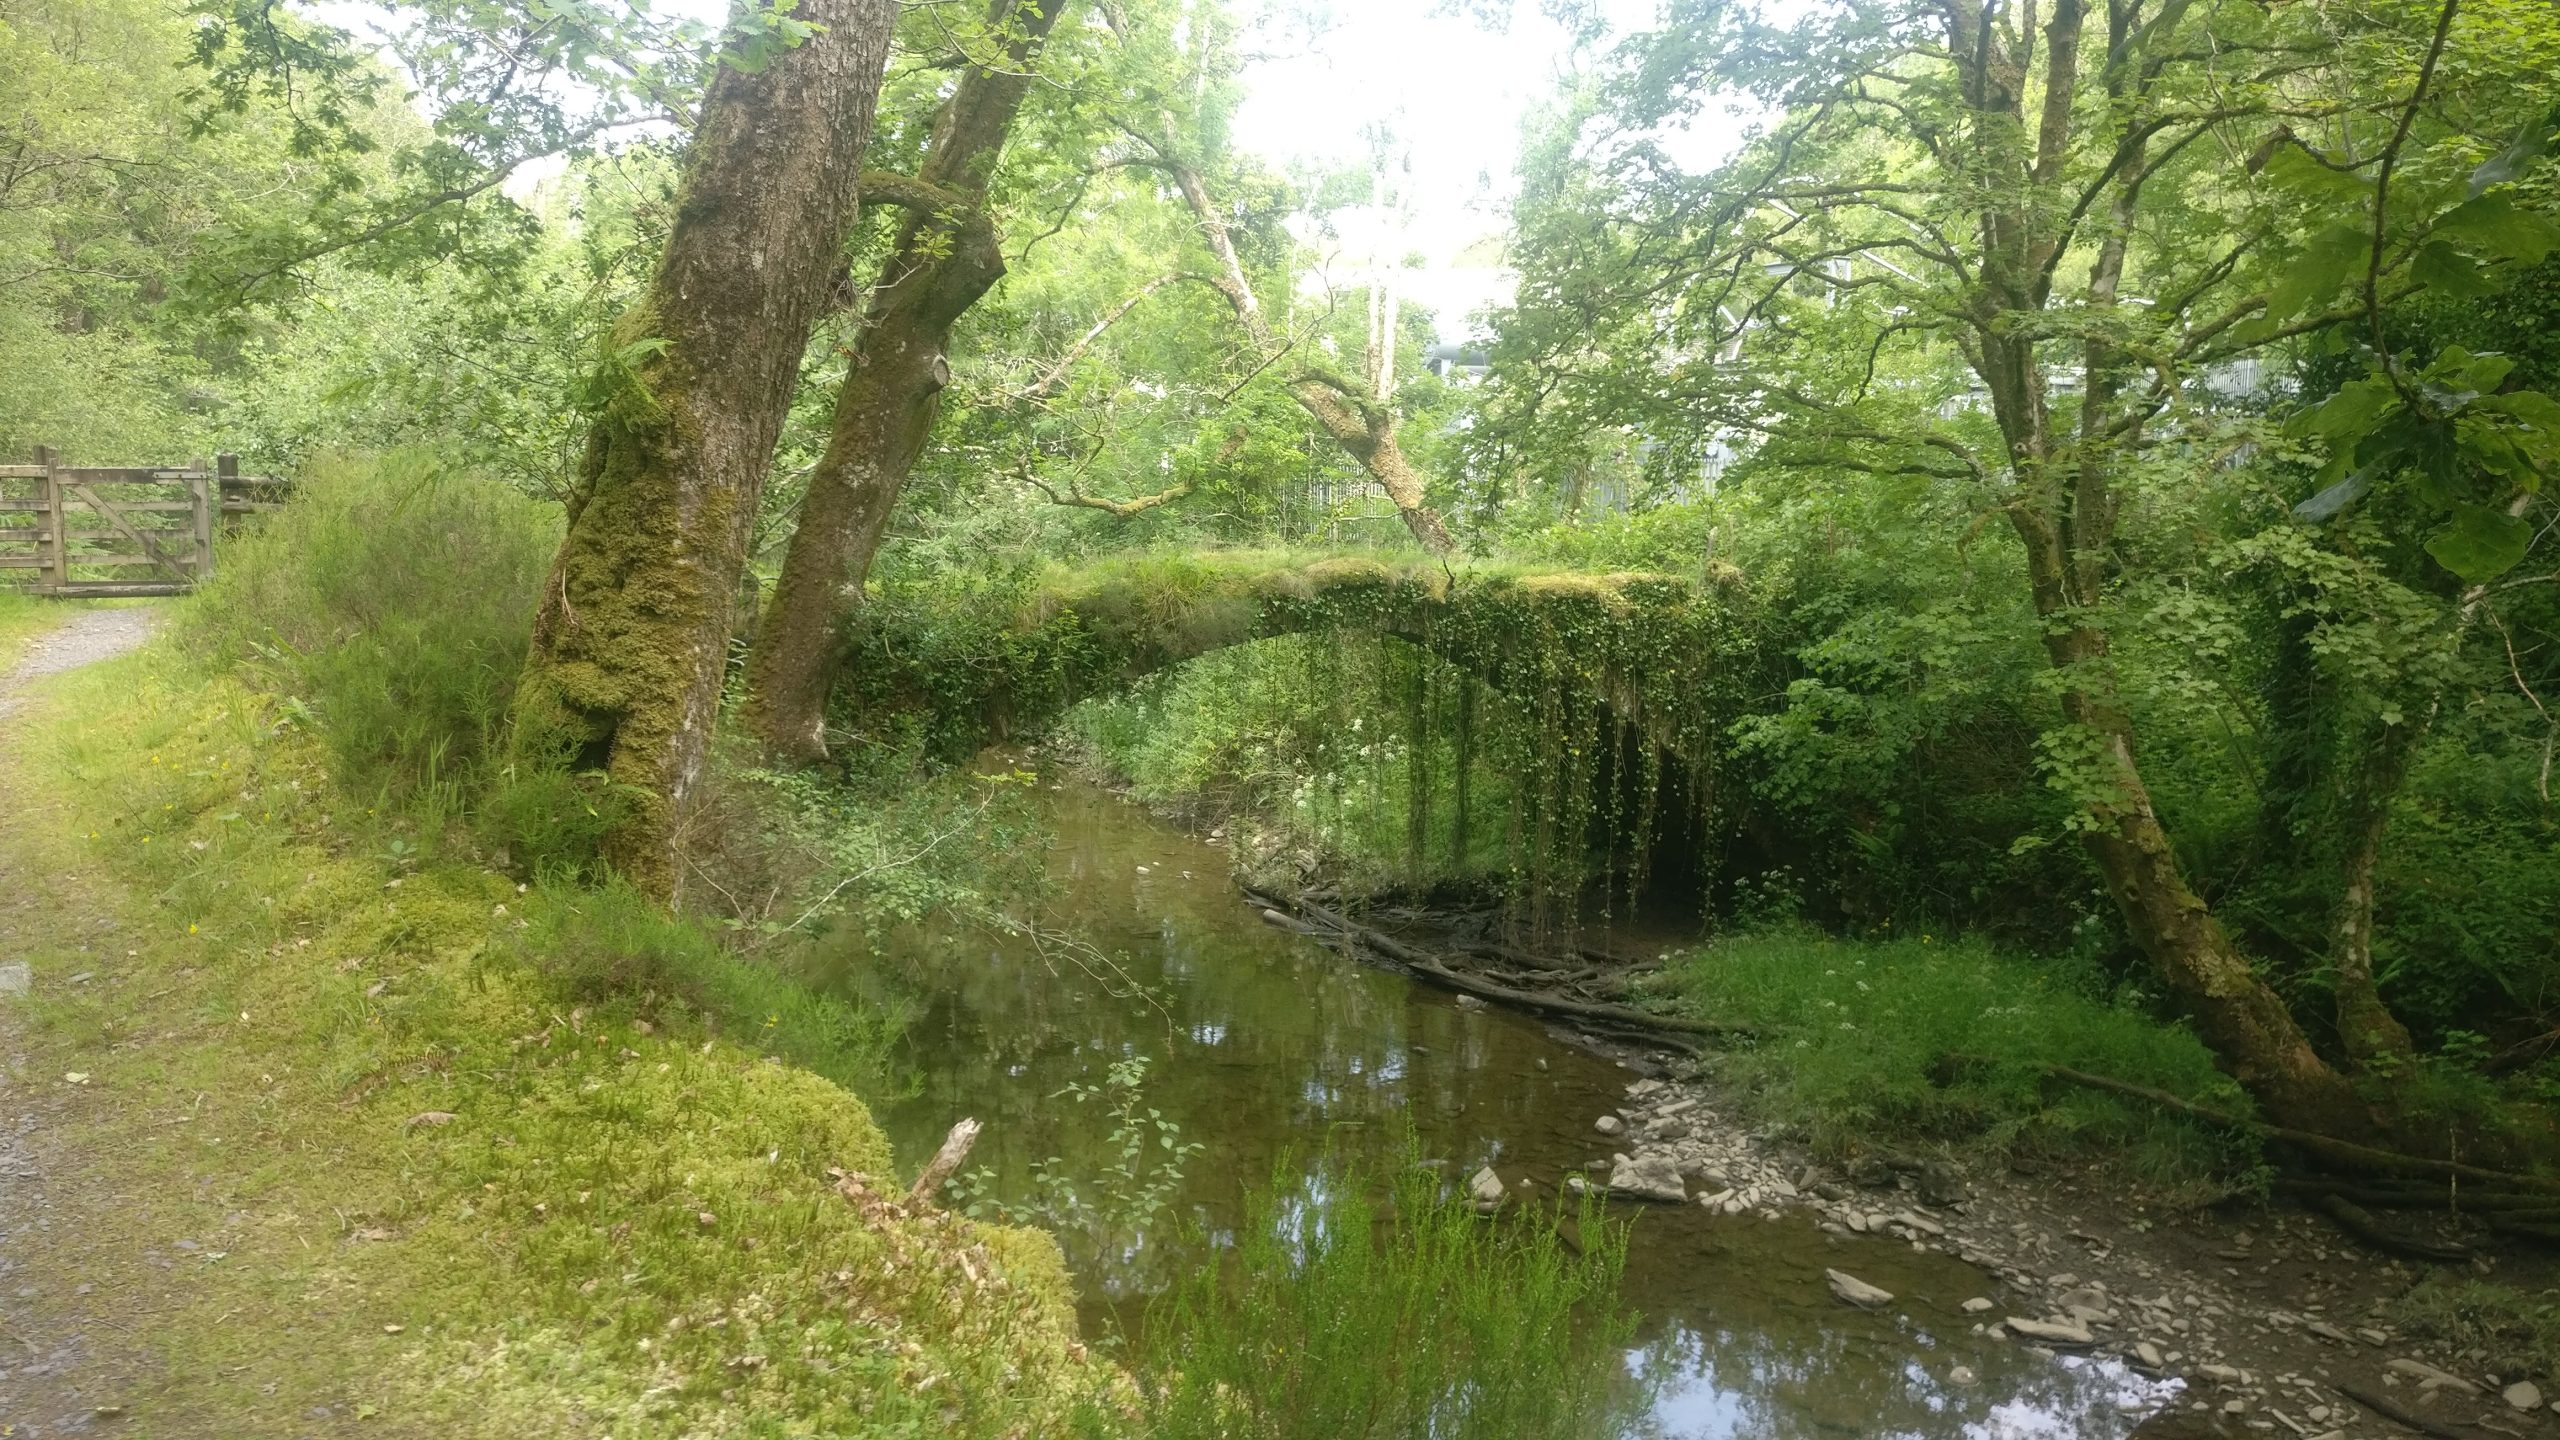 Photograph of trees with boughs their hanging over a stream, with a small bridge covered in dense green moss